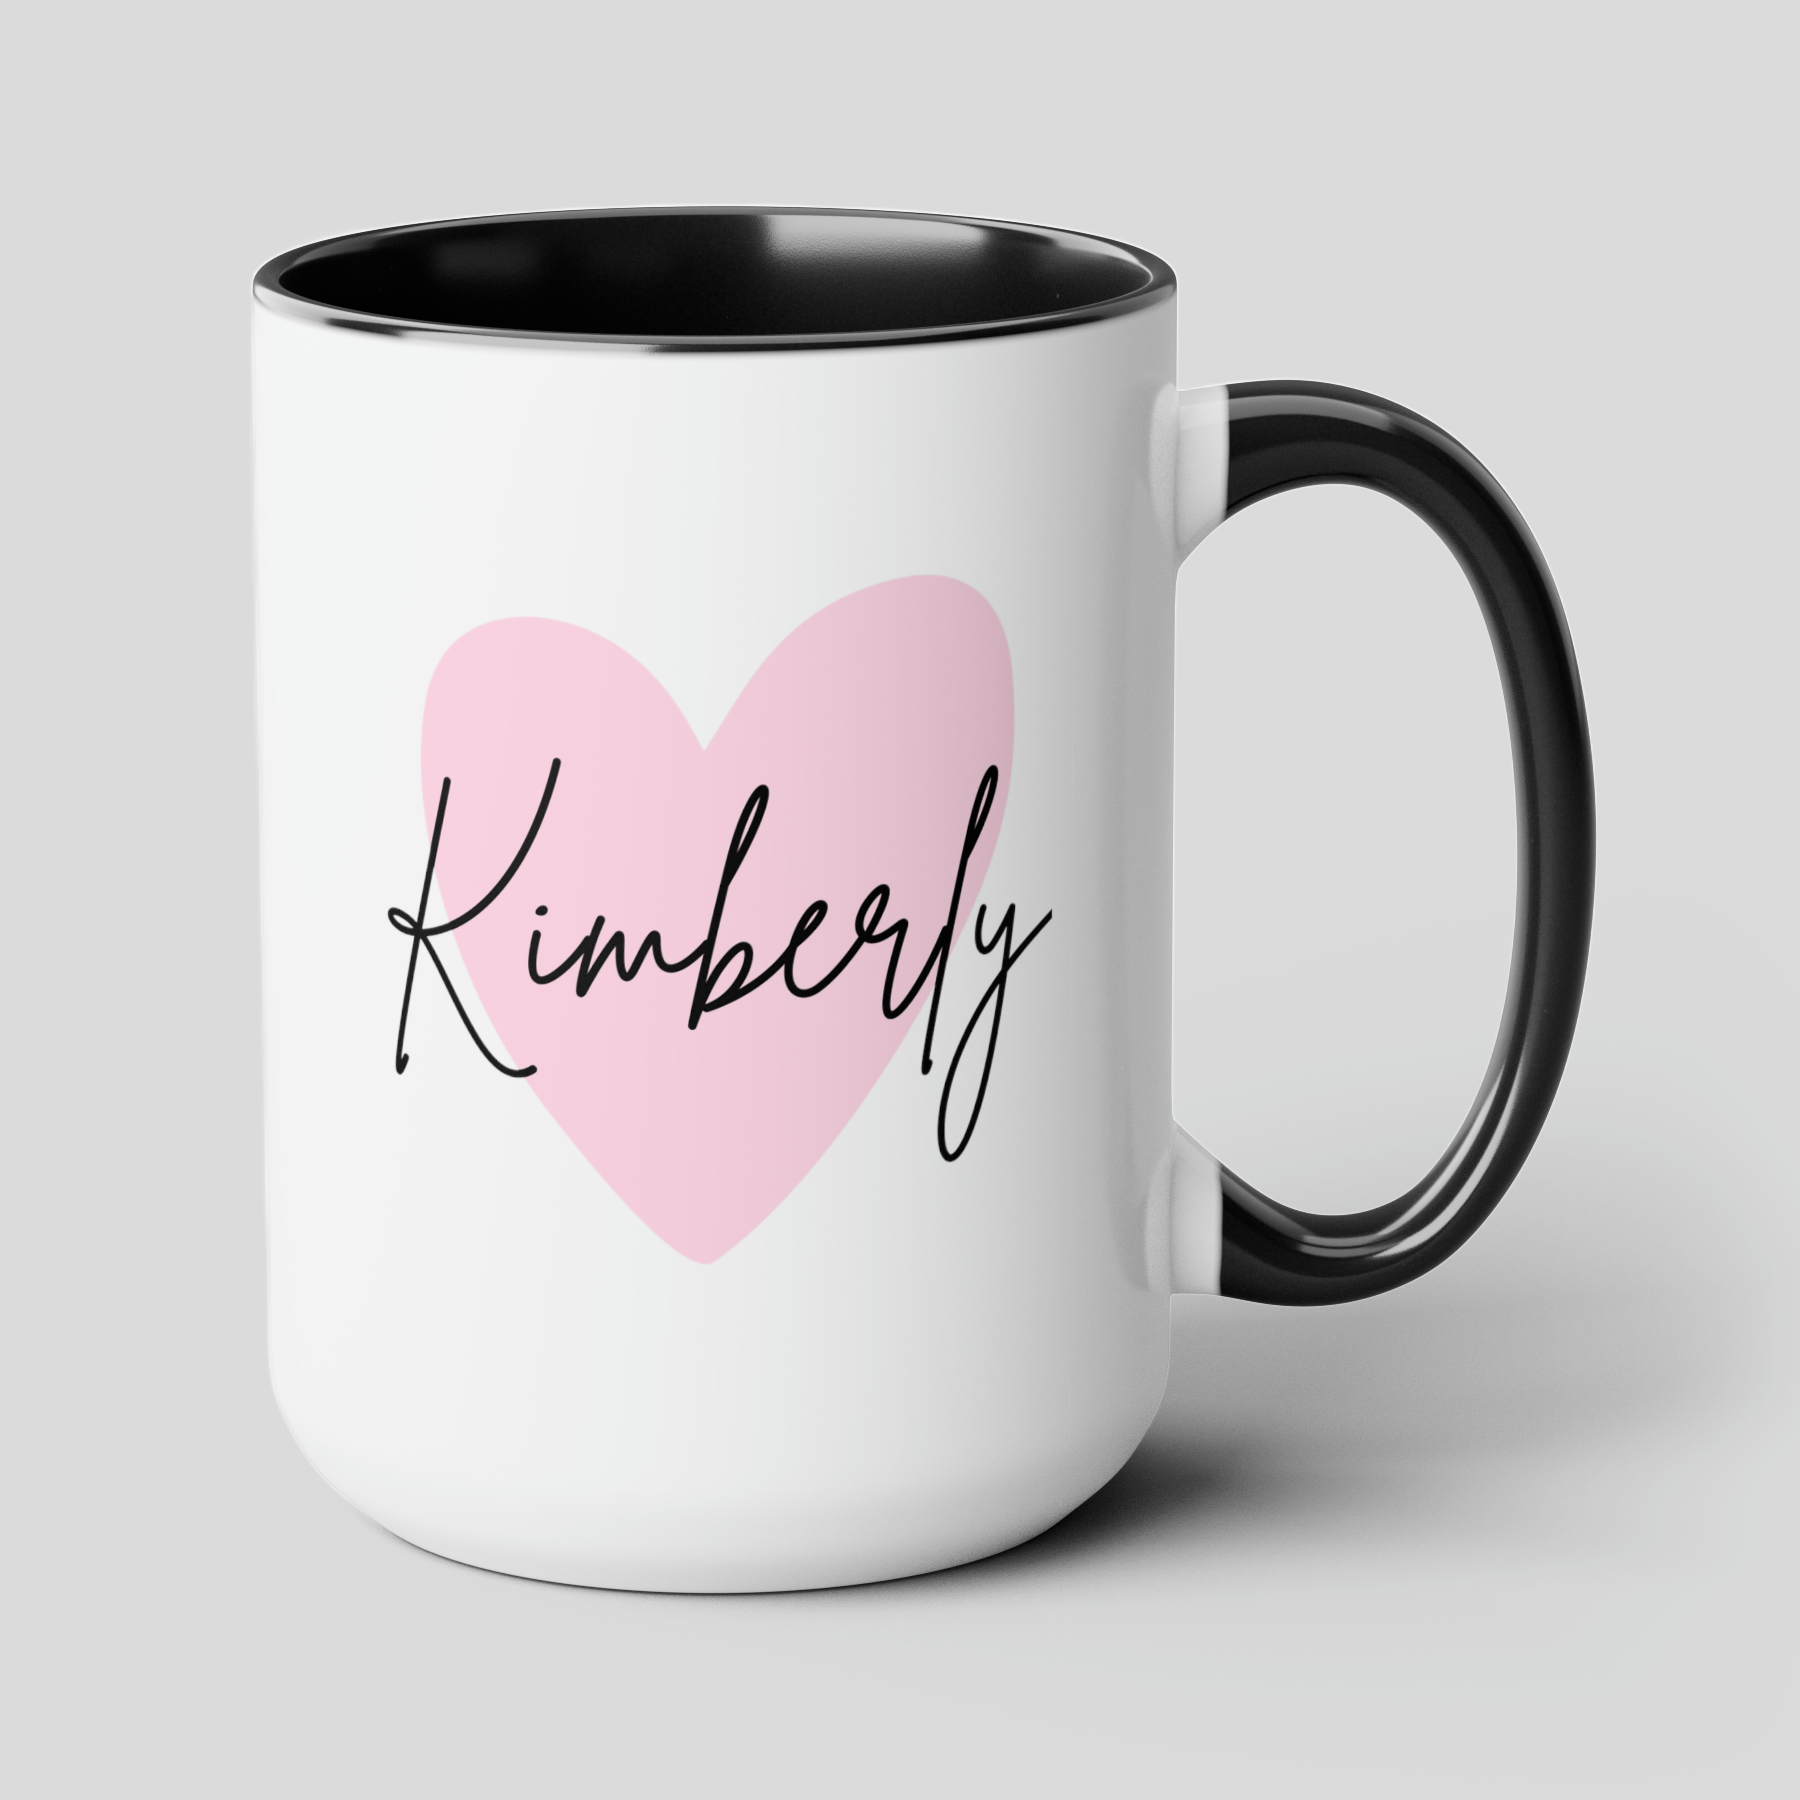 Name 15oz white with black accent funny large coffee mug gift for her mom grandma friend heart custom customized personalized waveywares wavey wares wavywares wavy wares cover